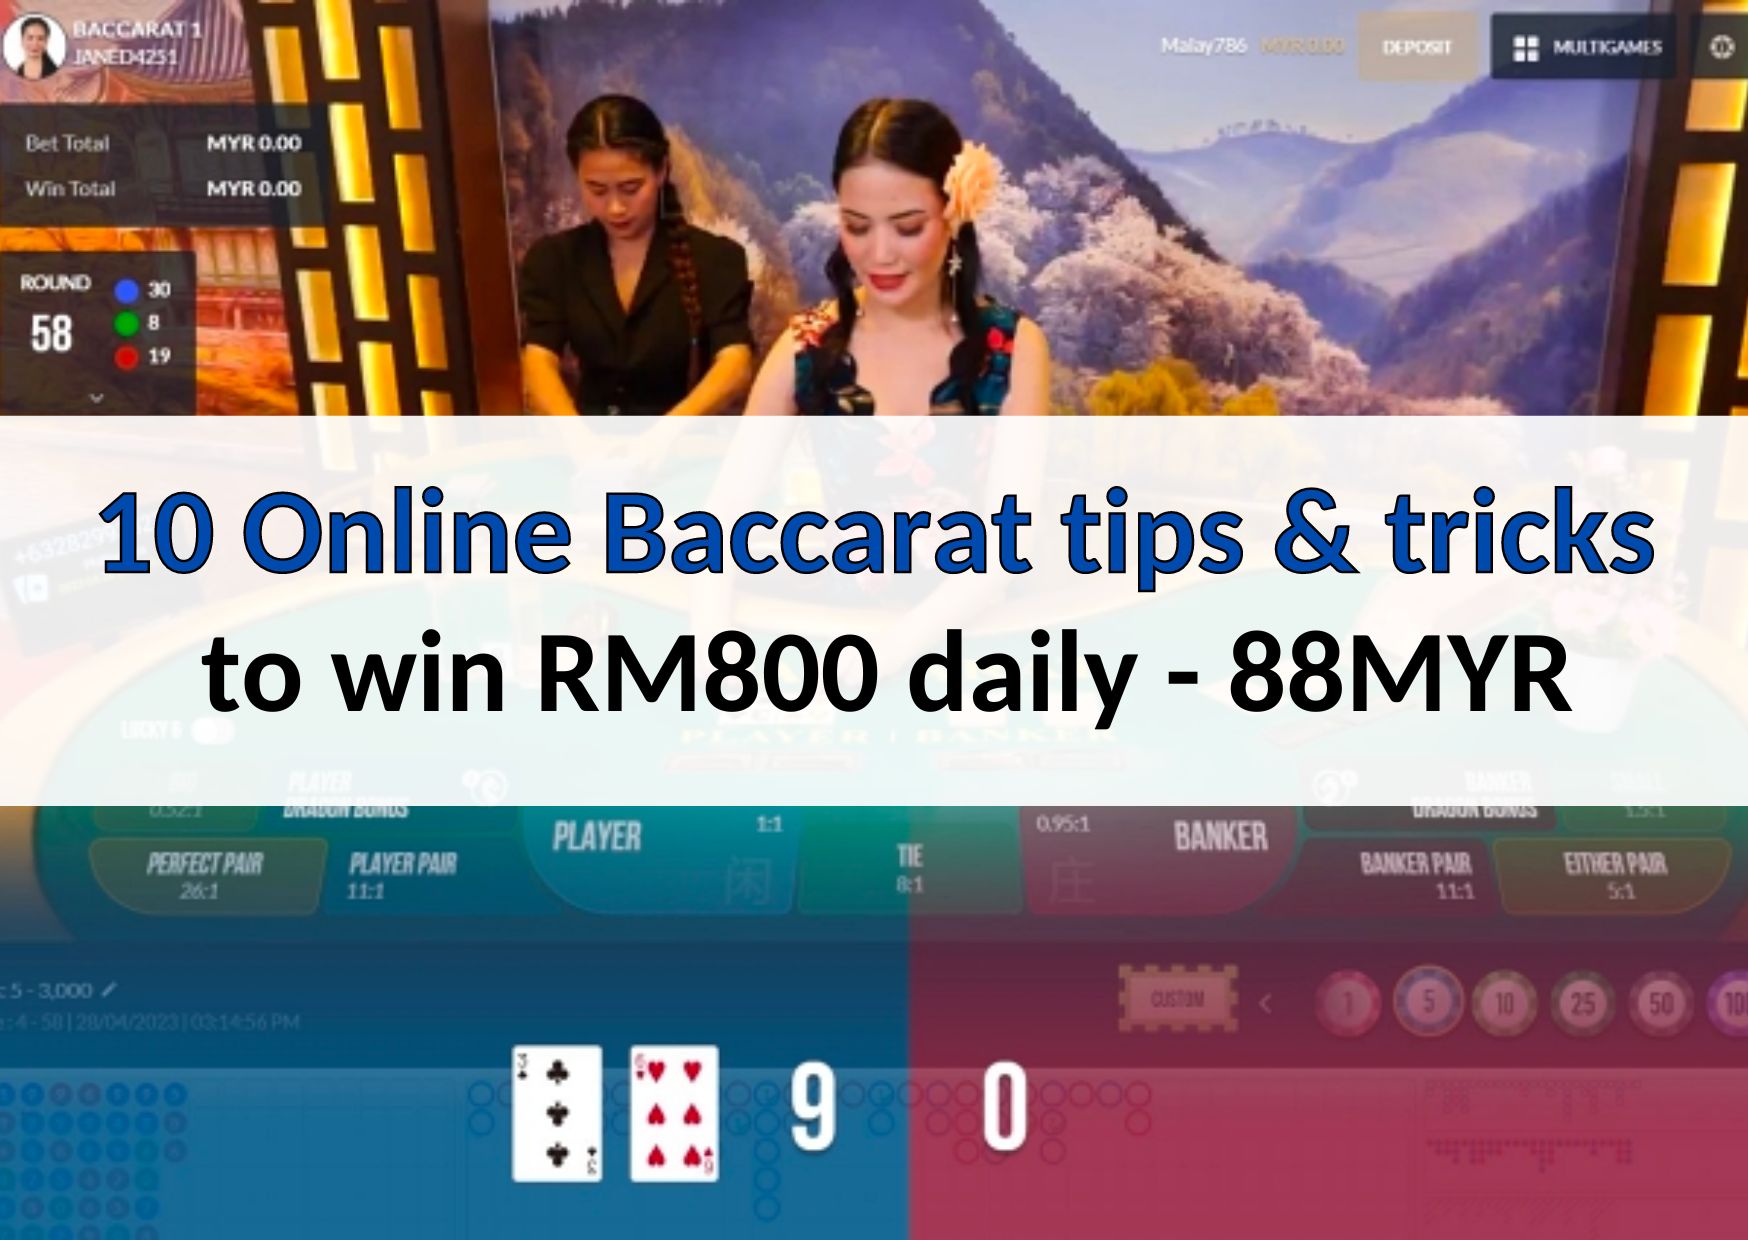 10 Online Baccarat tips and tricks to win RM800 daily- 88MYR